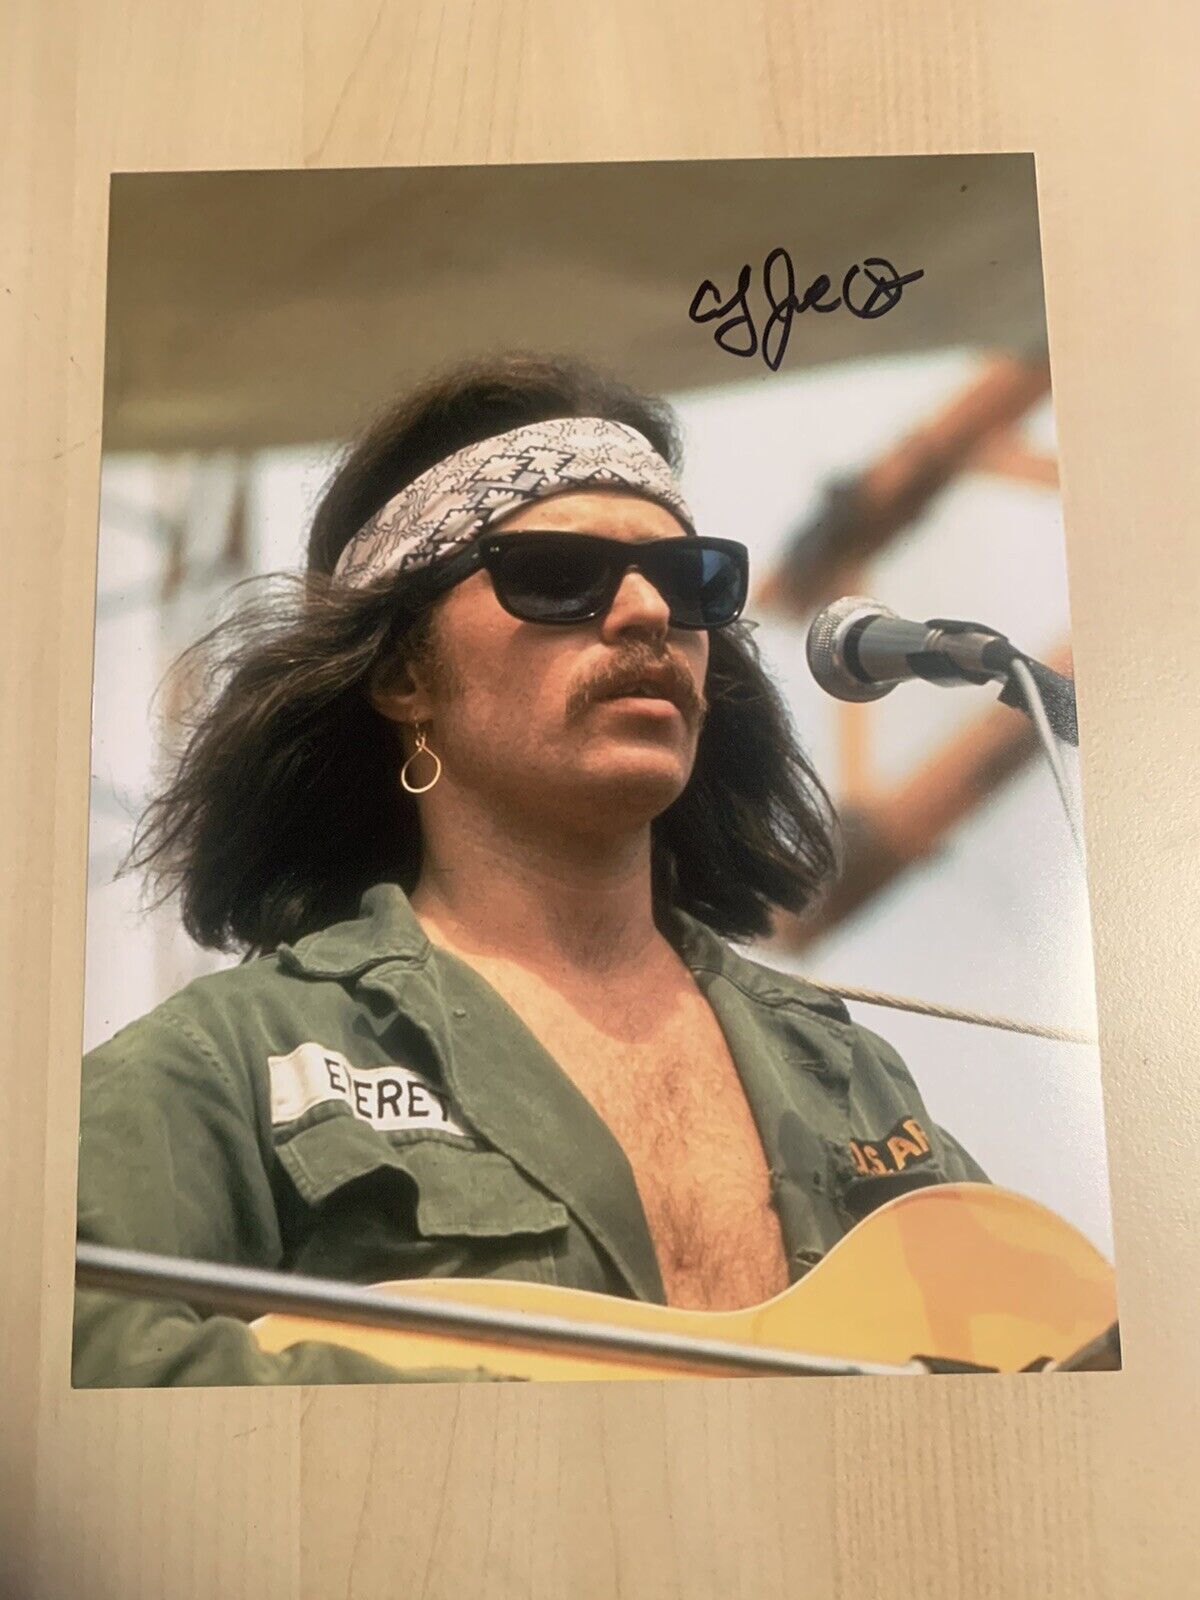 COUNTRY JOE MCDONALD SIGNED 8x10 Photo Poster painting AUTOGRAPHED WOODSTOCK SINGER RARE COA